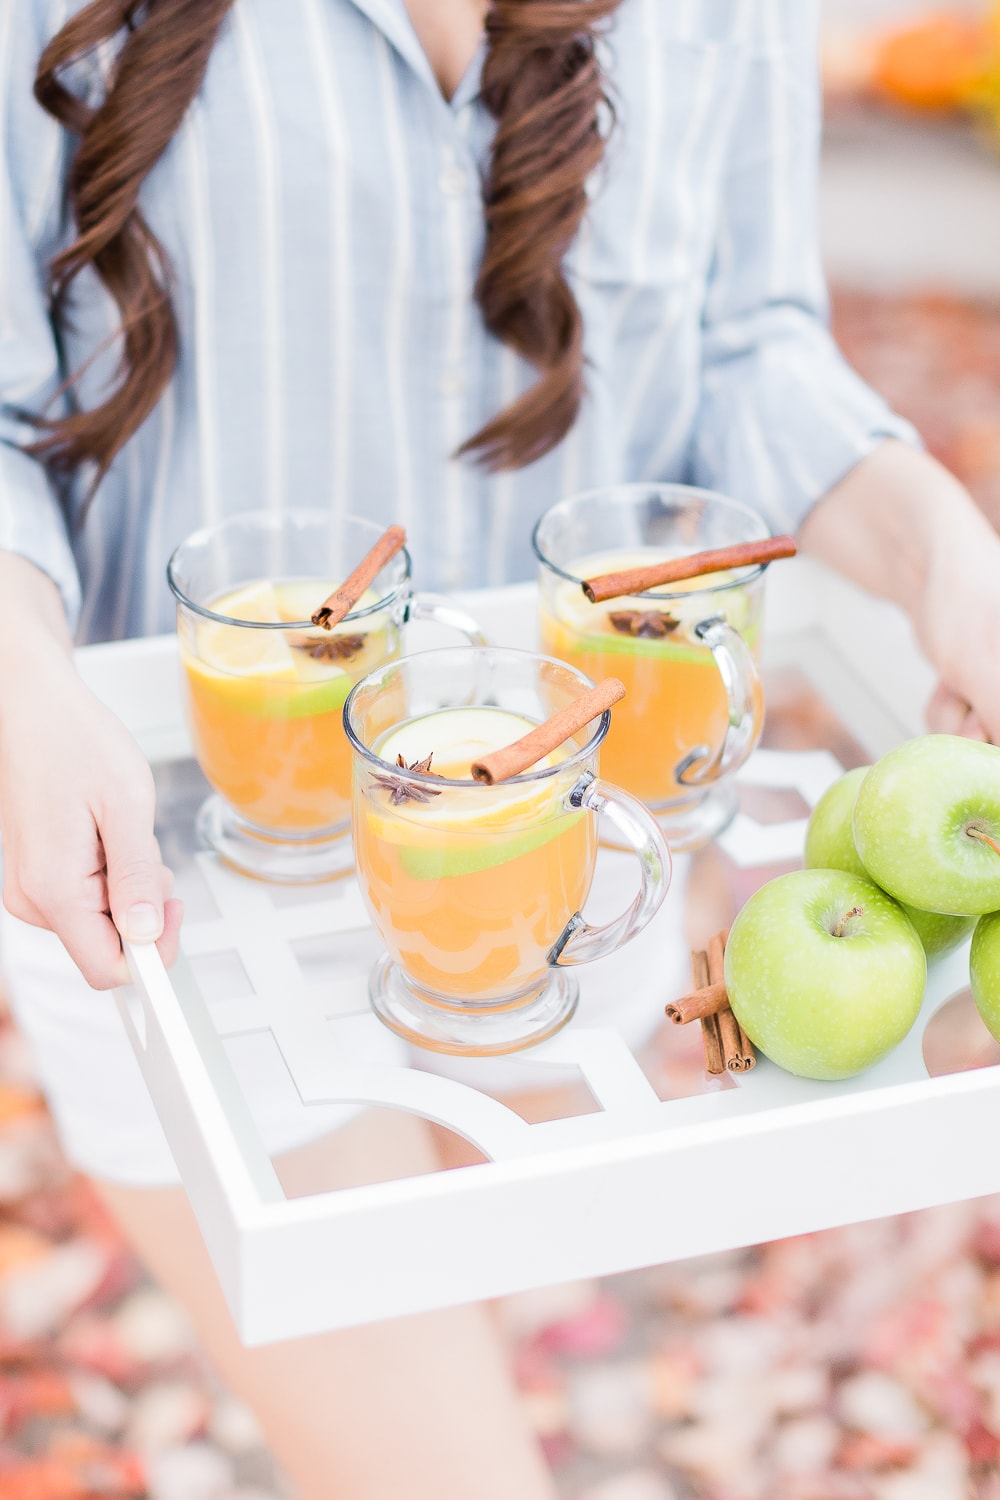 Blogger Stephanie Ziajka shares her spiced apple hot toddy recipe, which was adapted from Danielle Walker's Against All Grain: Celebrations cookbook, on Diary of a Debutante